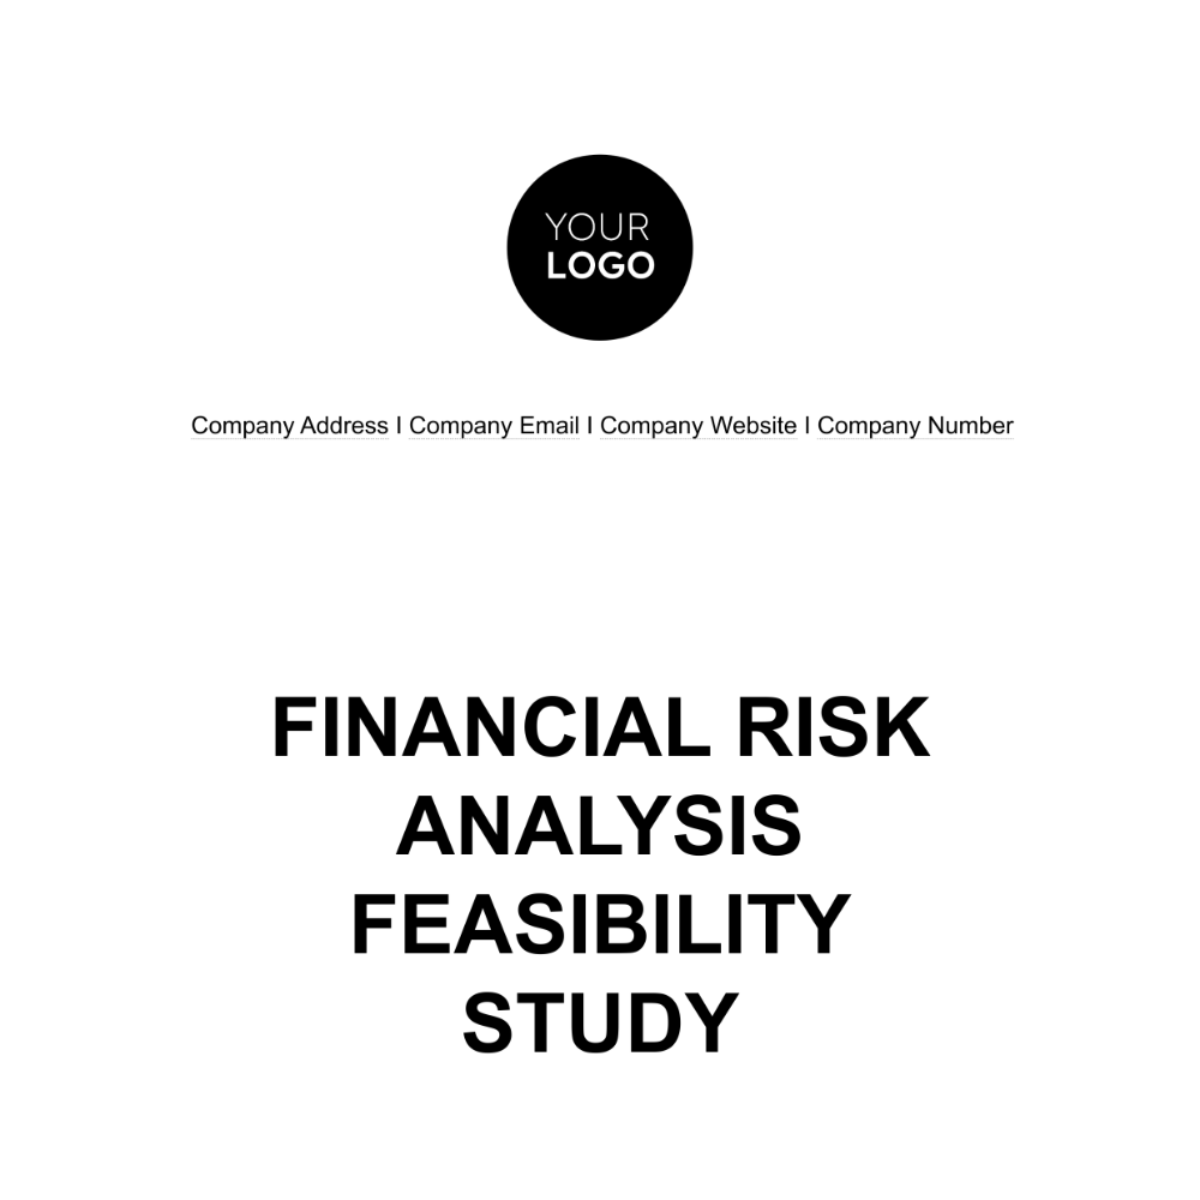 Financial Risk Analysis Feasibility Study Template